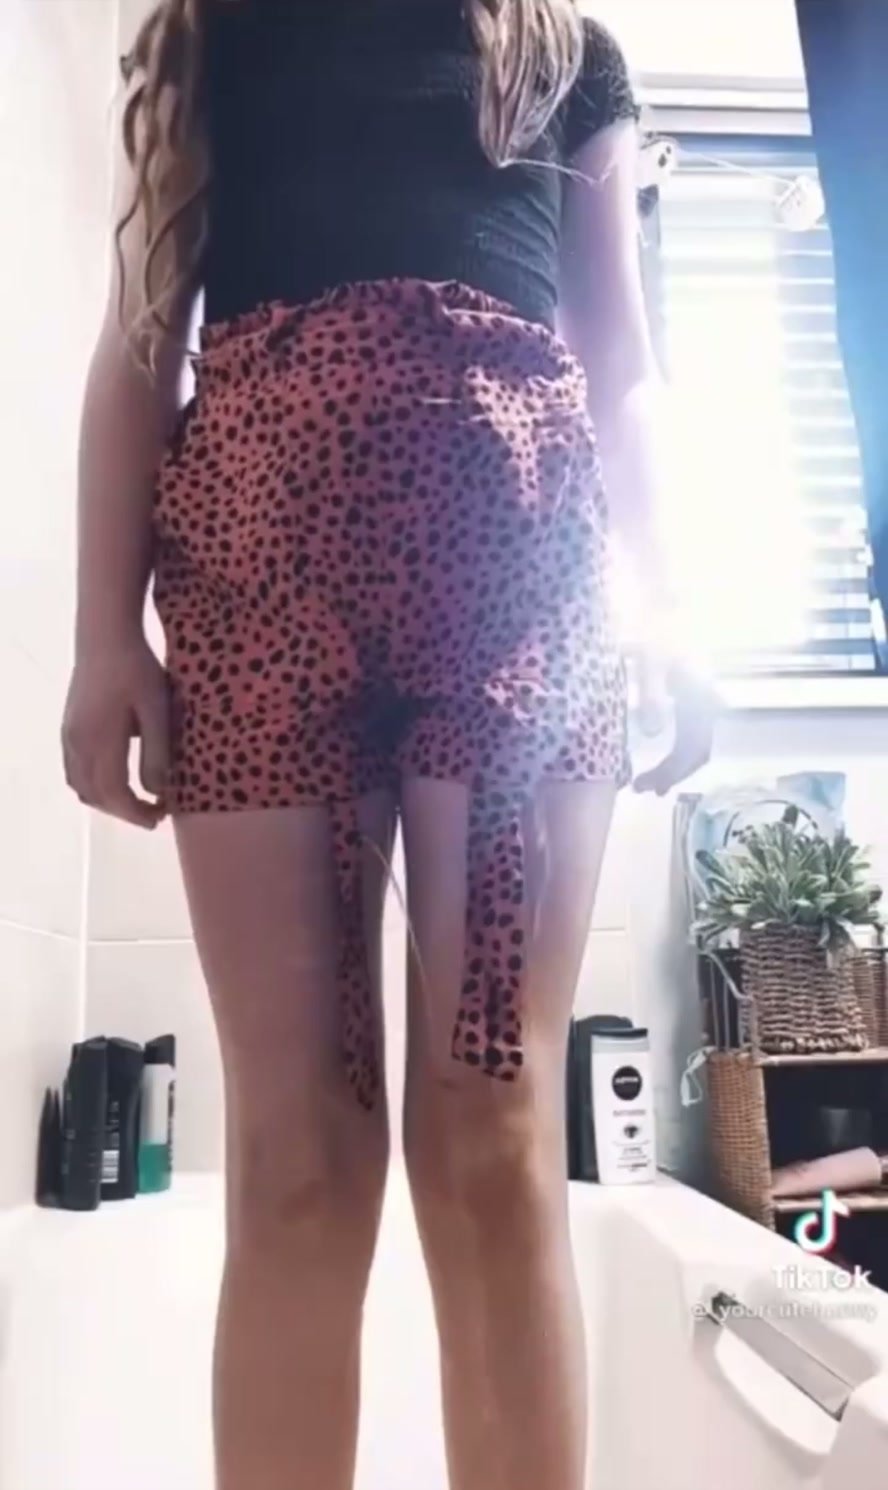 girl pees leopard shorts